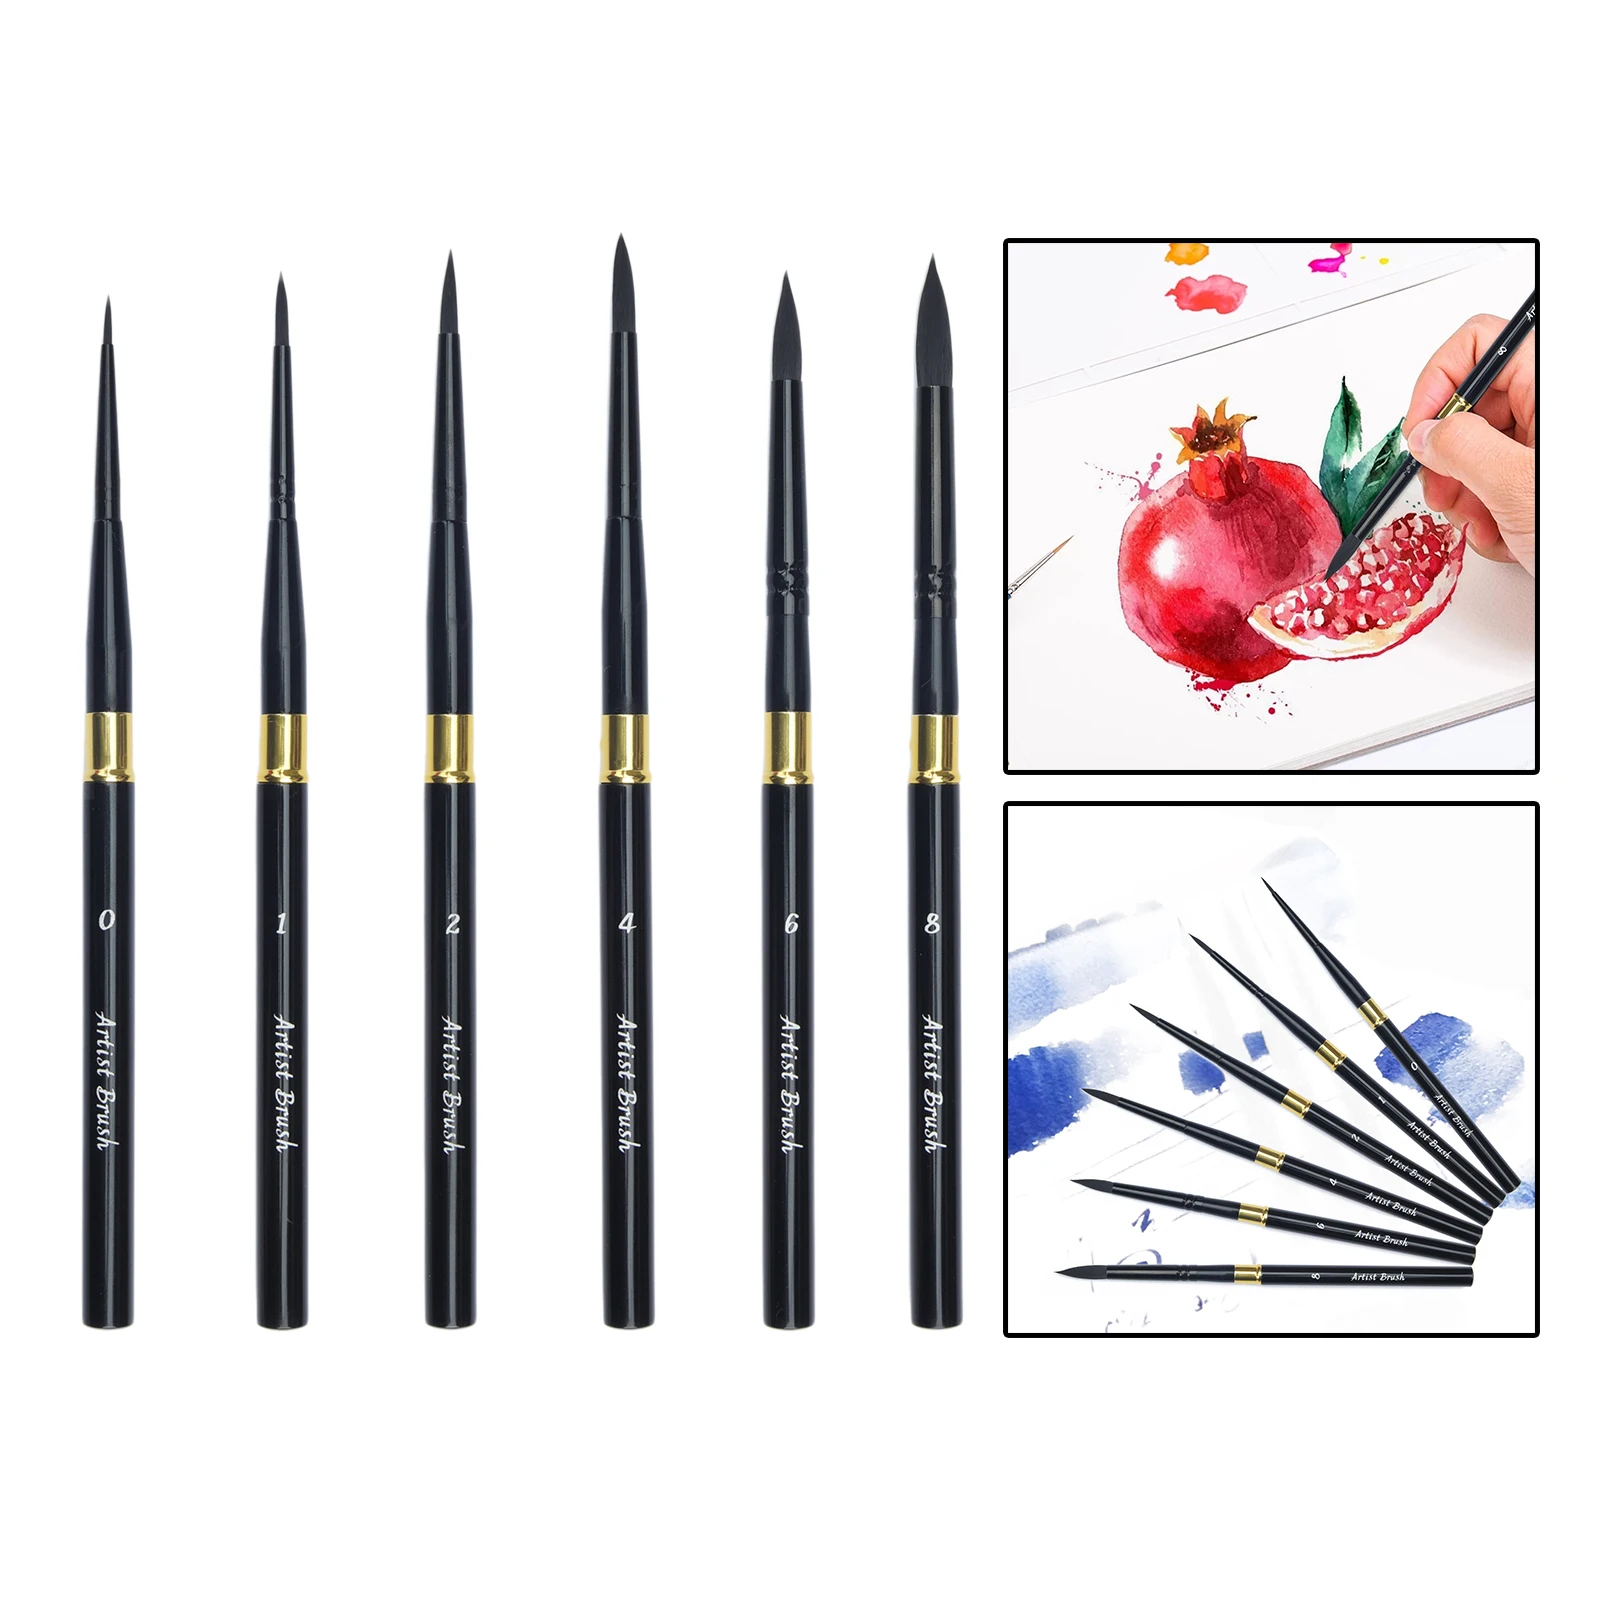 6Pcs Nylon Artist Paint Brushes Set Professional Watercolor Oil Acrylic Painting Brushes Art Painting Supplies Drawing Pen Brush